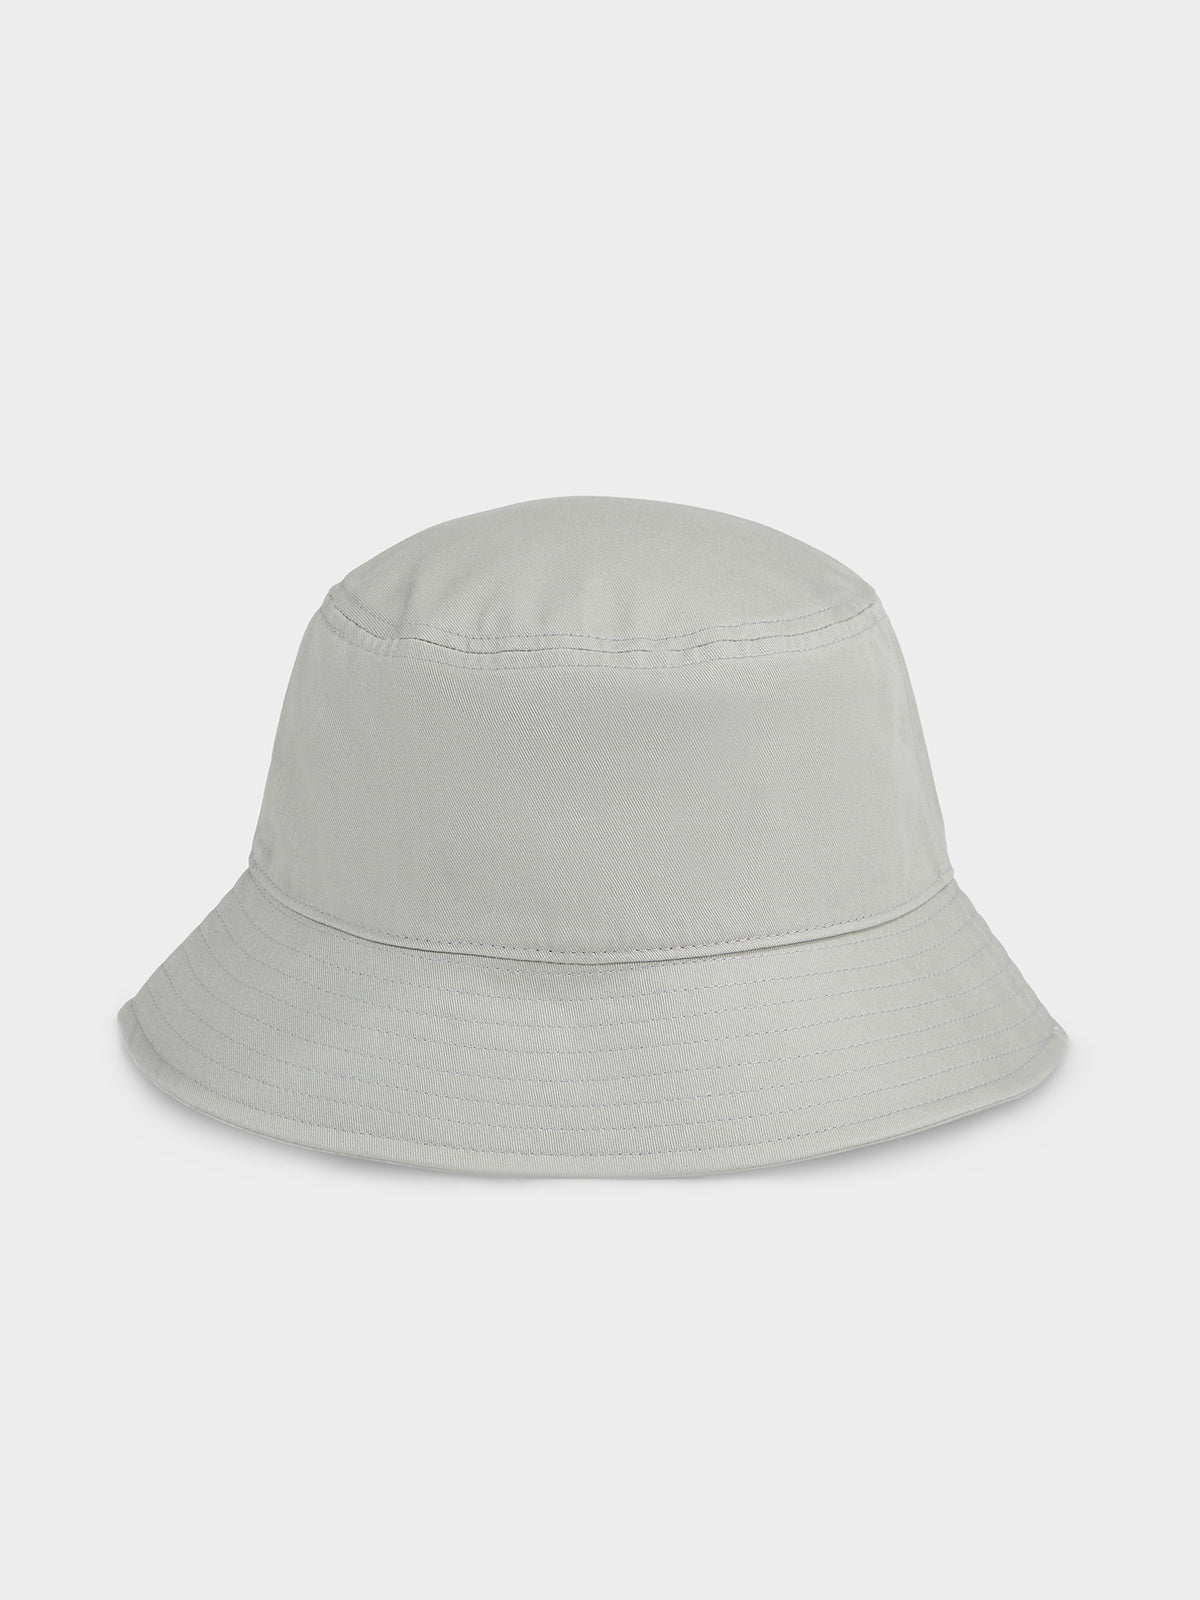 Tommy Hilfiger Flag Bucket Hat in Faded Willow | Faded Willow